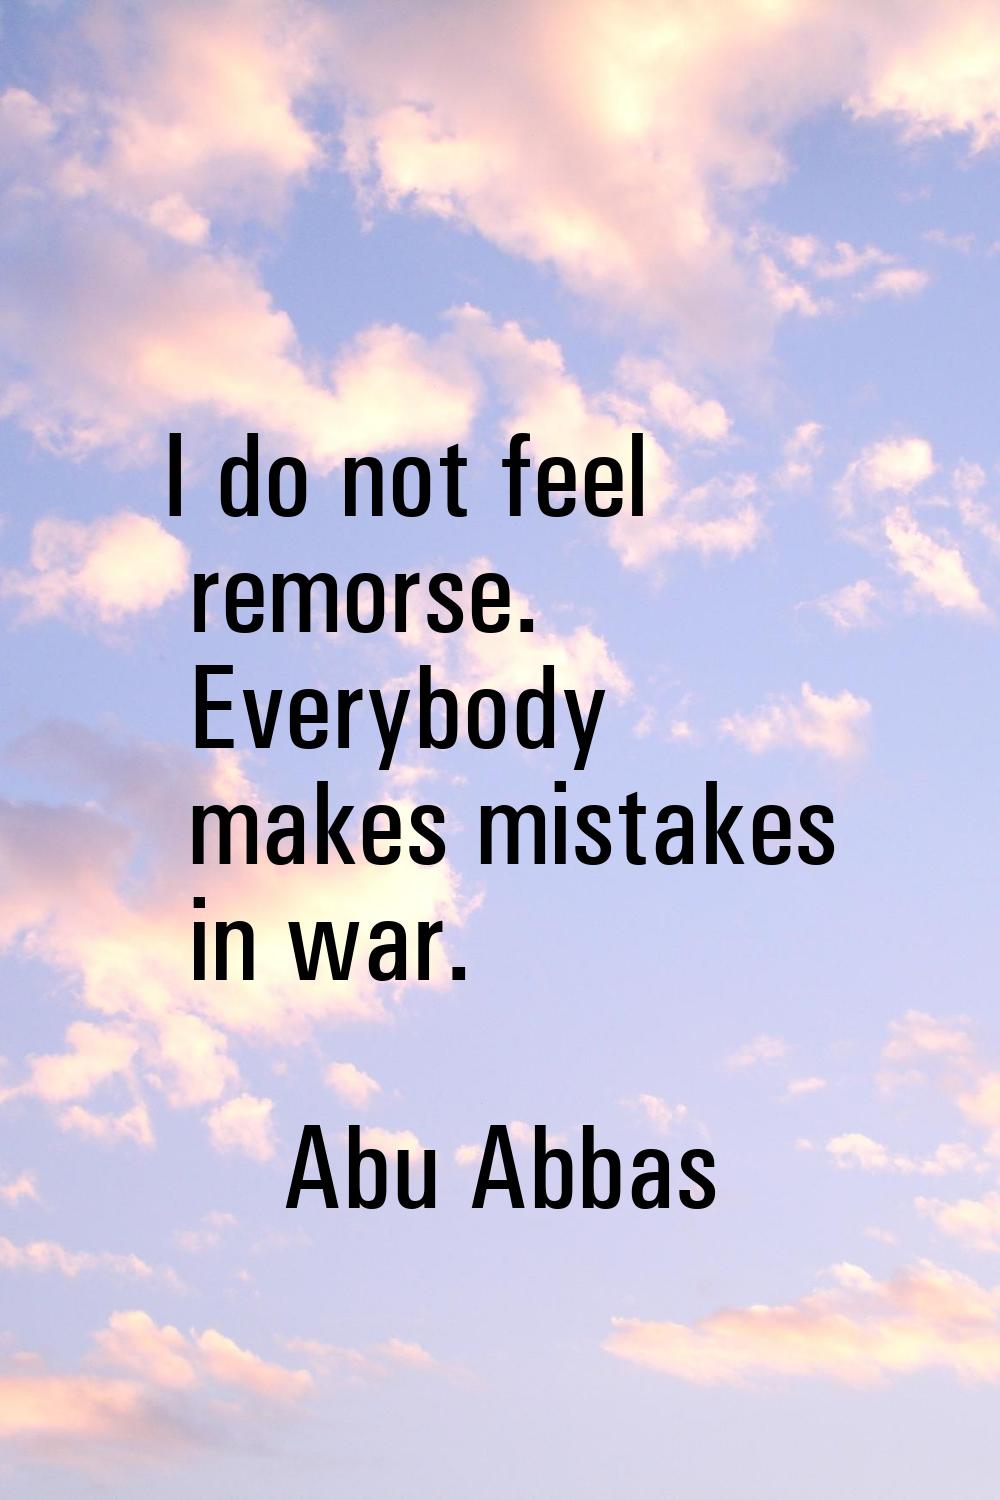 I do not feel remorse. Everybody makes mistakes in war.